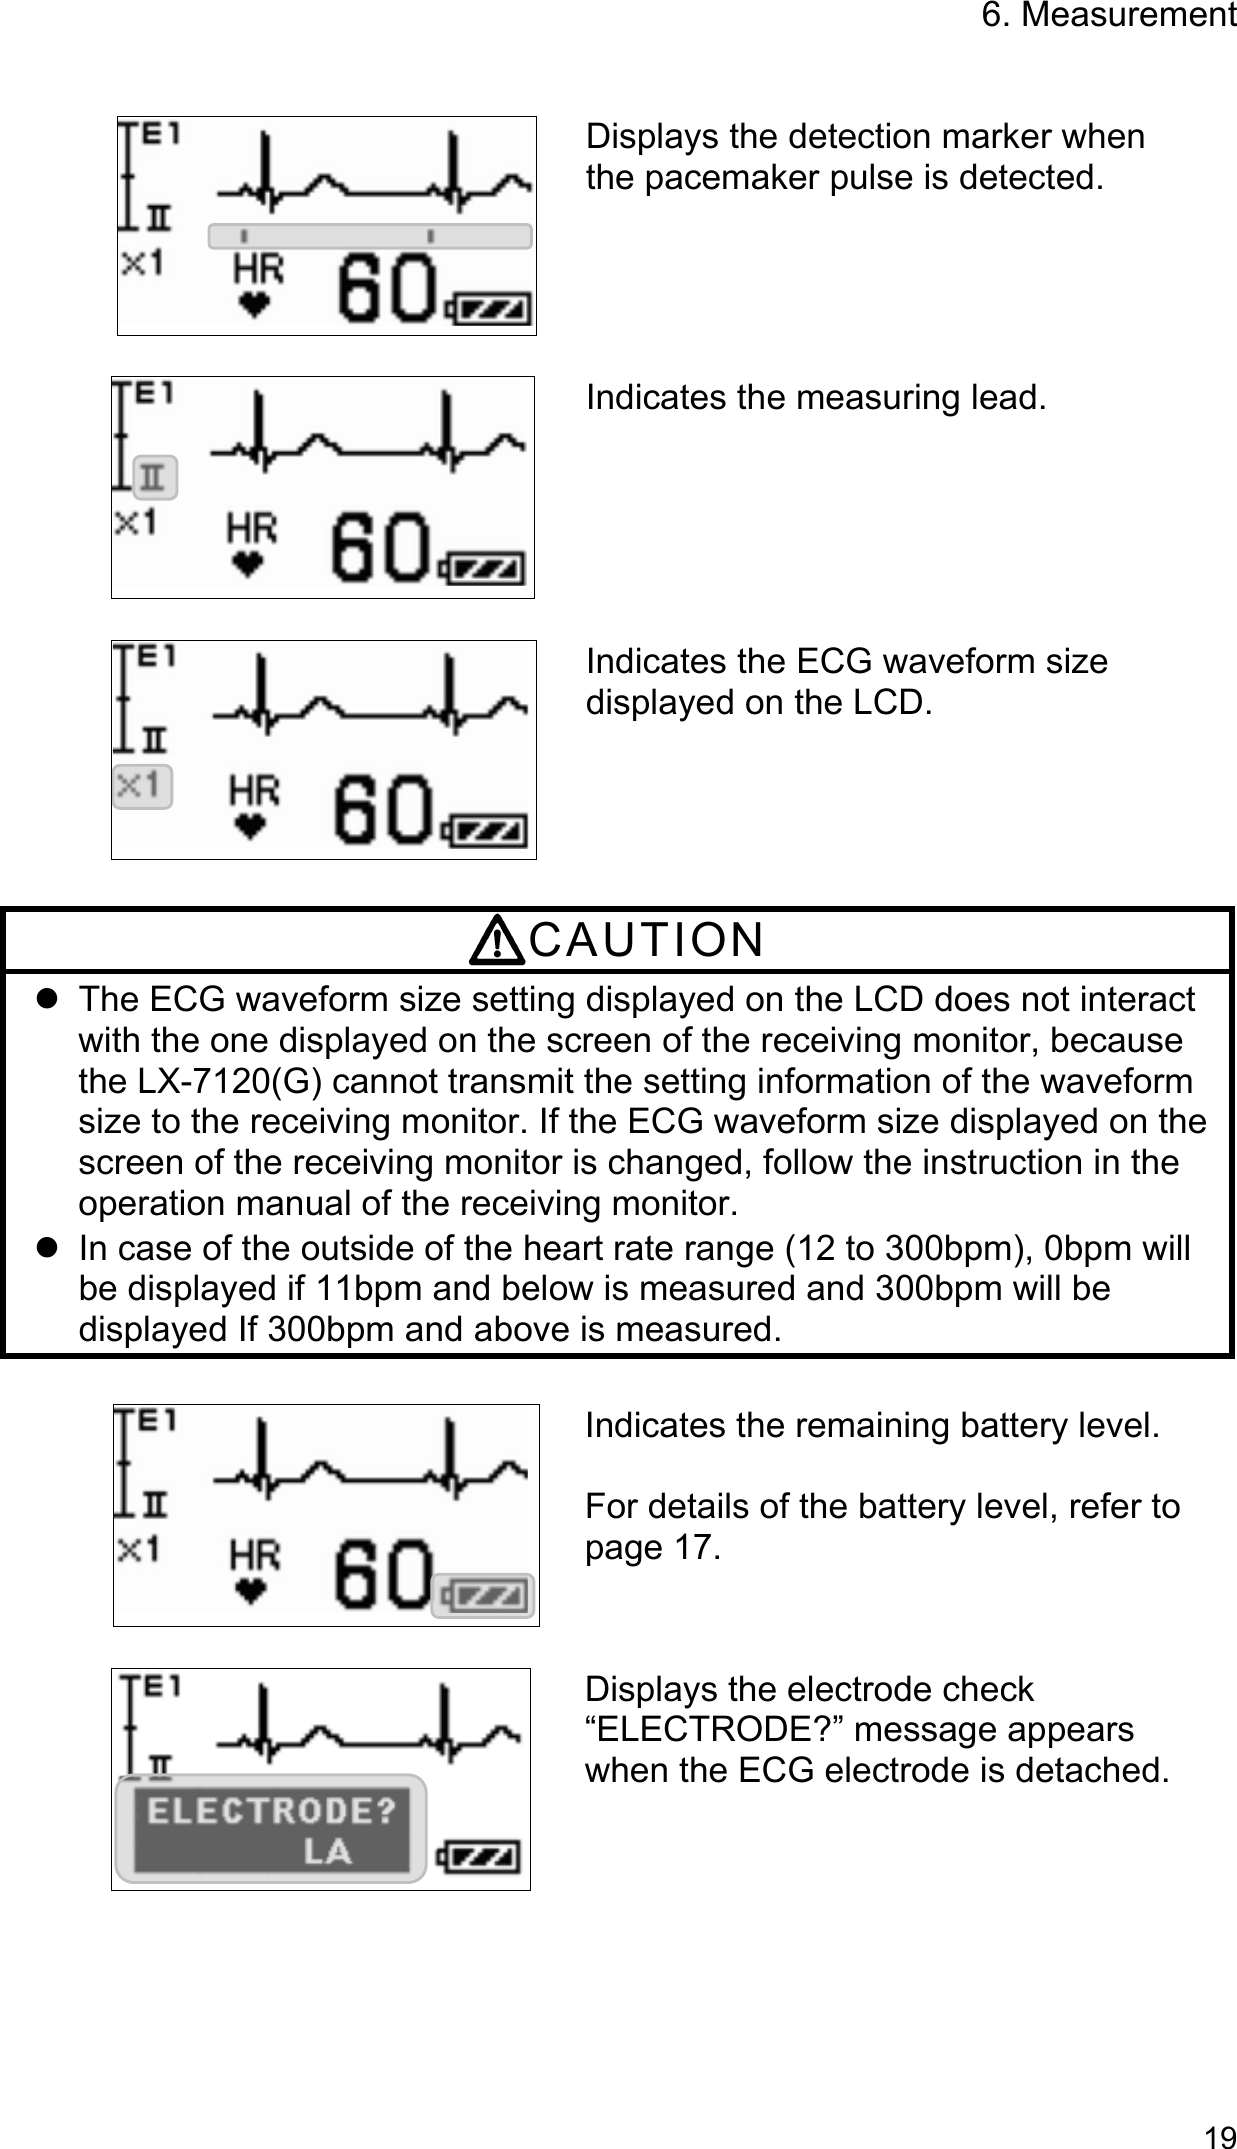 6. Measurement   19    Displays the detection marker when the pacemaker pulse is detected.   Indicates the measuring lead.  Indicates the ECG waveform size displayed on the LCD.  CAUTION   The ECG waveform size setting displayed on the LCD does not interact with the one displayed on the screen of the receiving monitor, because the LX-7120(G) cannot transmit the setting information of the waveform size to the receiving monitor. If the ECG waveform size displayed on the screen of the receiving monitor is changed, follow the instruction in the operation manual of the receiving monitor.   In case of the outside of the heart rate range (12 to 300bpm), 0bpm will be displayed if 11bpm and below is measured and 300bpm will be displayed If 300bpm and above is measured.  Indicates the remaining battery level.  For details of the battery level, refer to page 17.   Displays the electrode check “ELECTRODE?” message appears when the ECG electrode is detached.